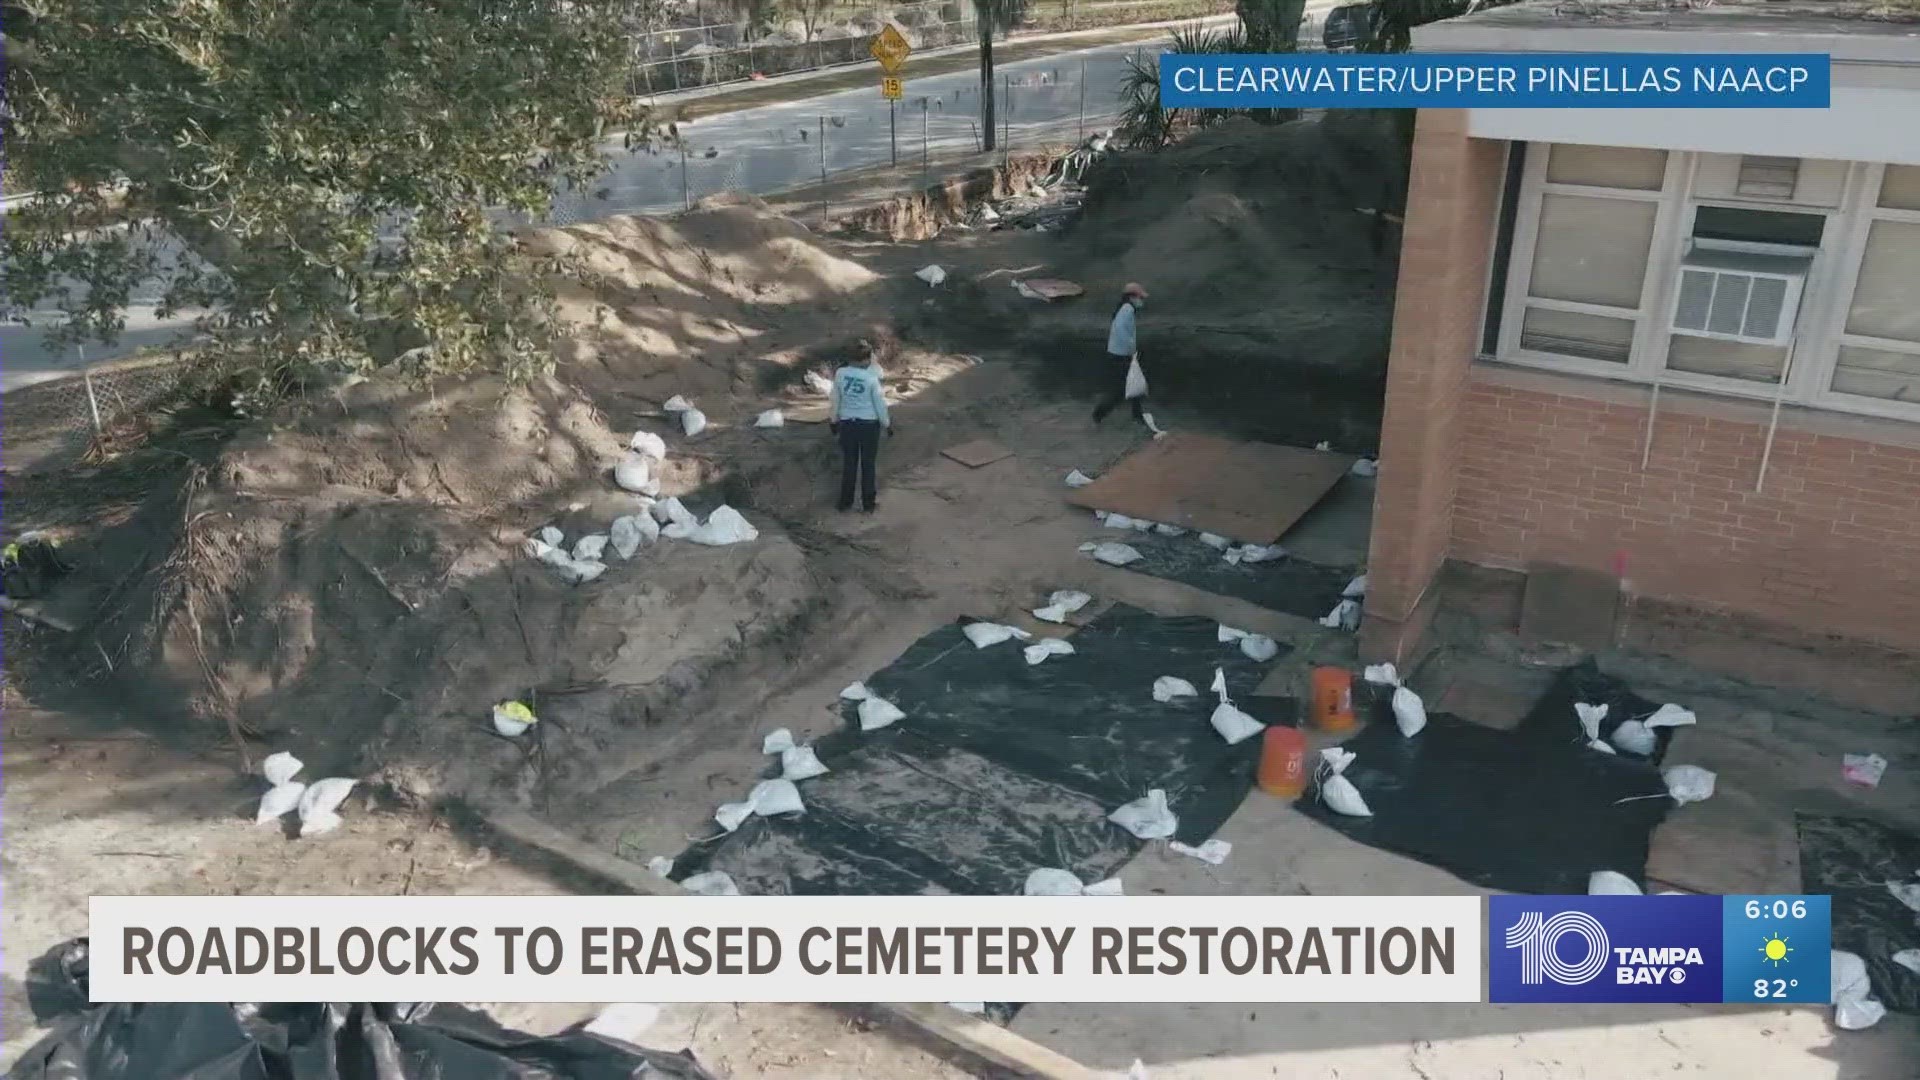 Nearly 400 graves were found under a Clearwater school and a business just miles away.